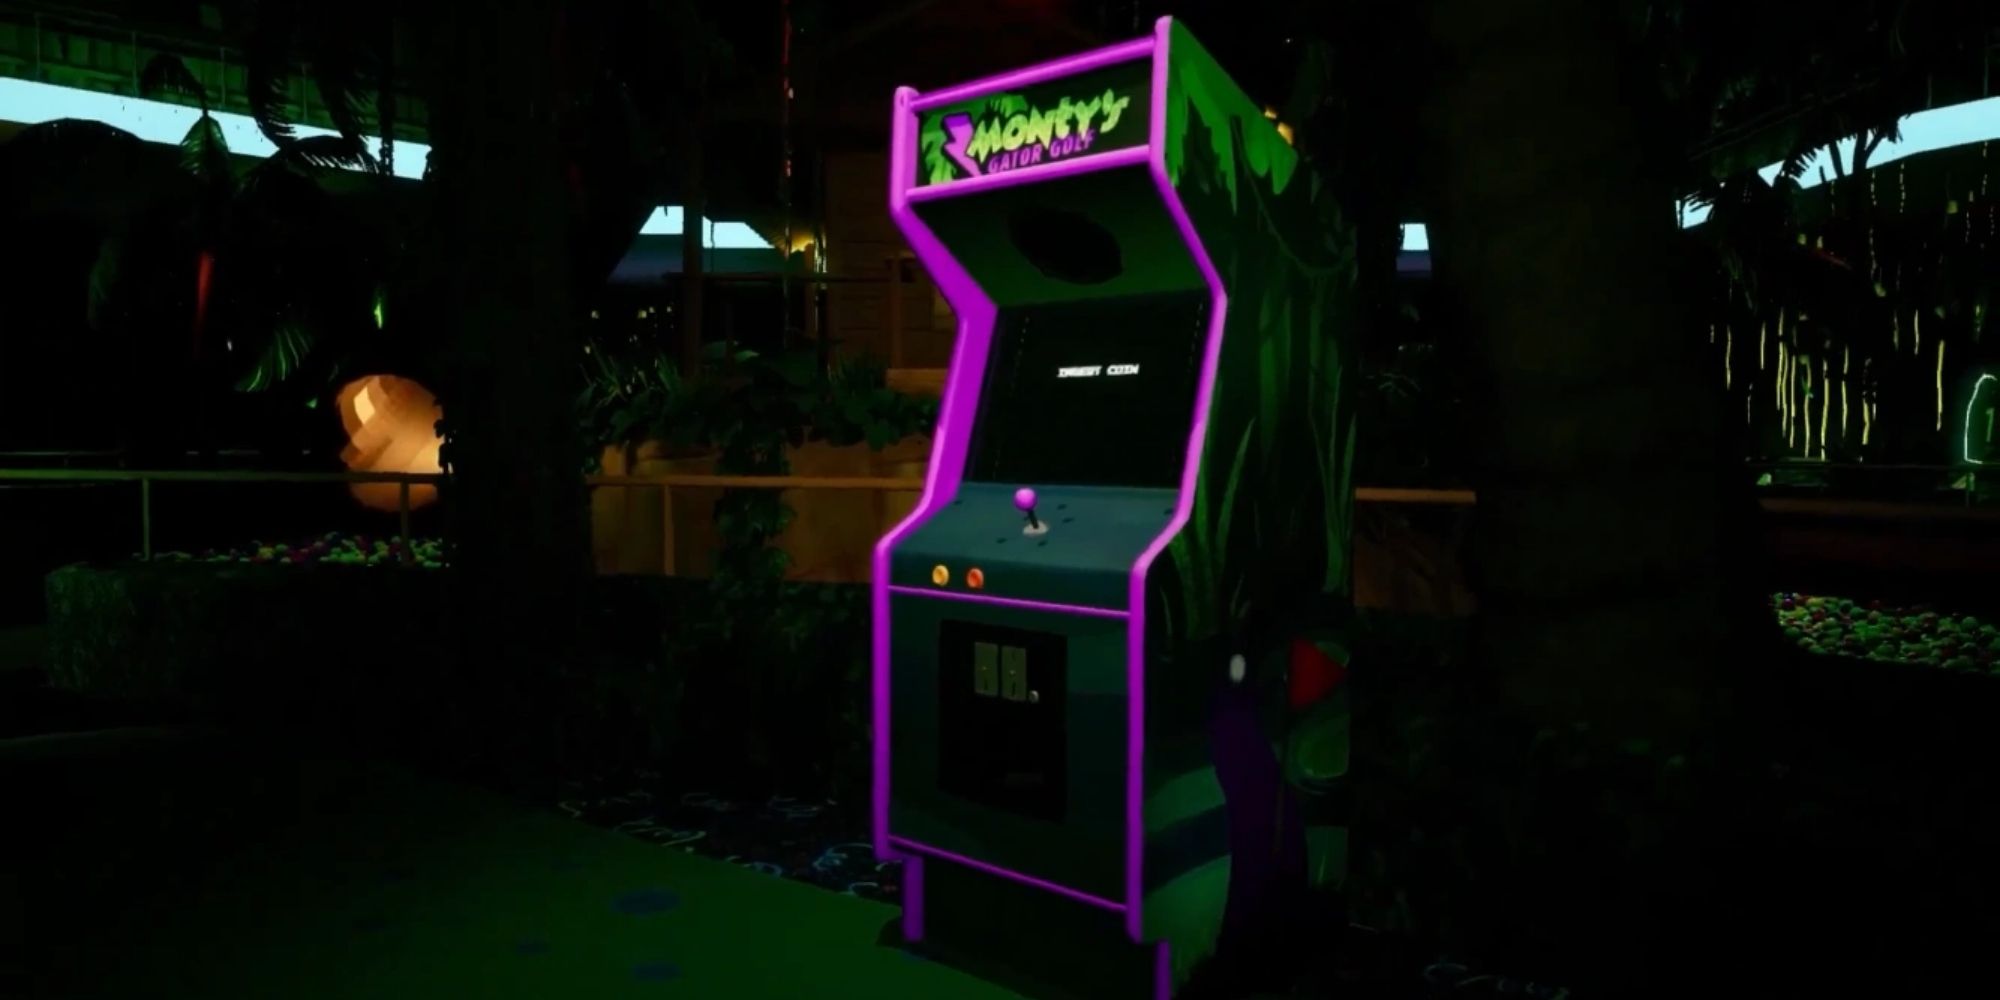 A green and purple arcade machine in the middle of Monty's Gator Golf